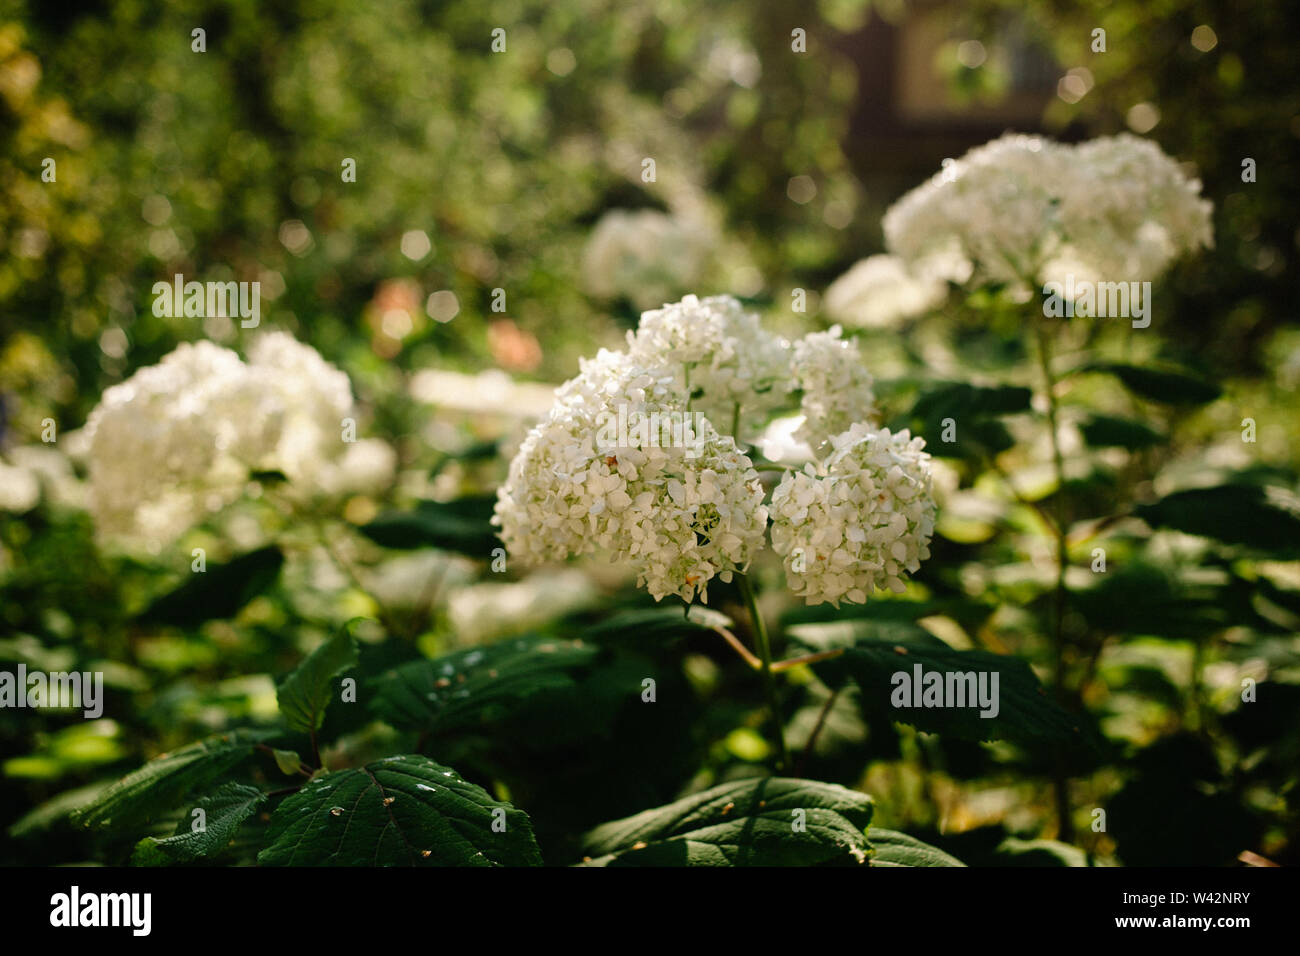 A Clustered 'Annabelle' Hydrangea. Hydrangea Arborescens. Flowering Shrub. Annabelle Is The Best Known Variety Of Smooth Hydrangea. Stock Photo